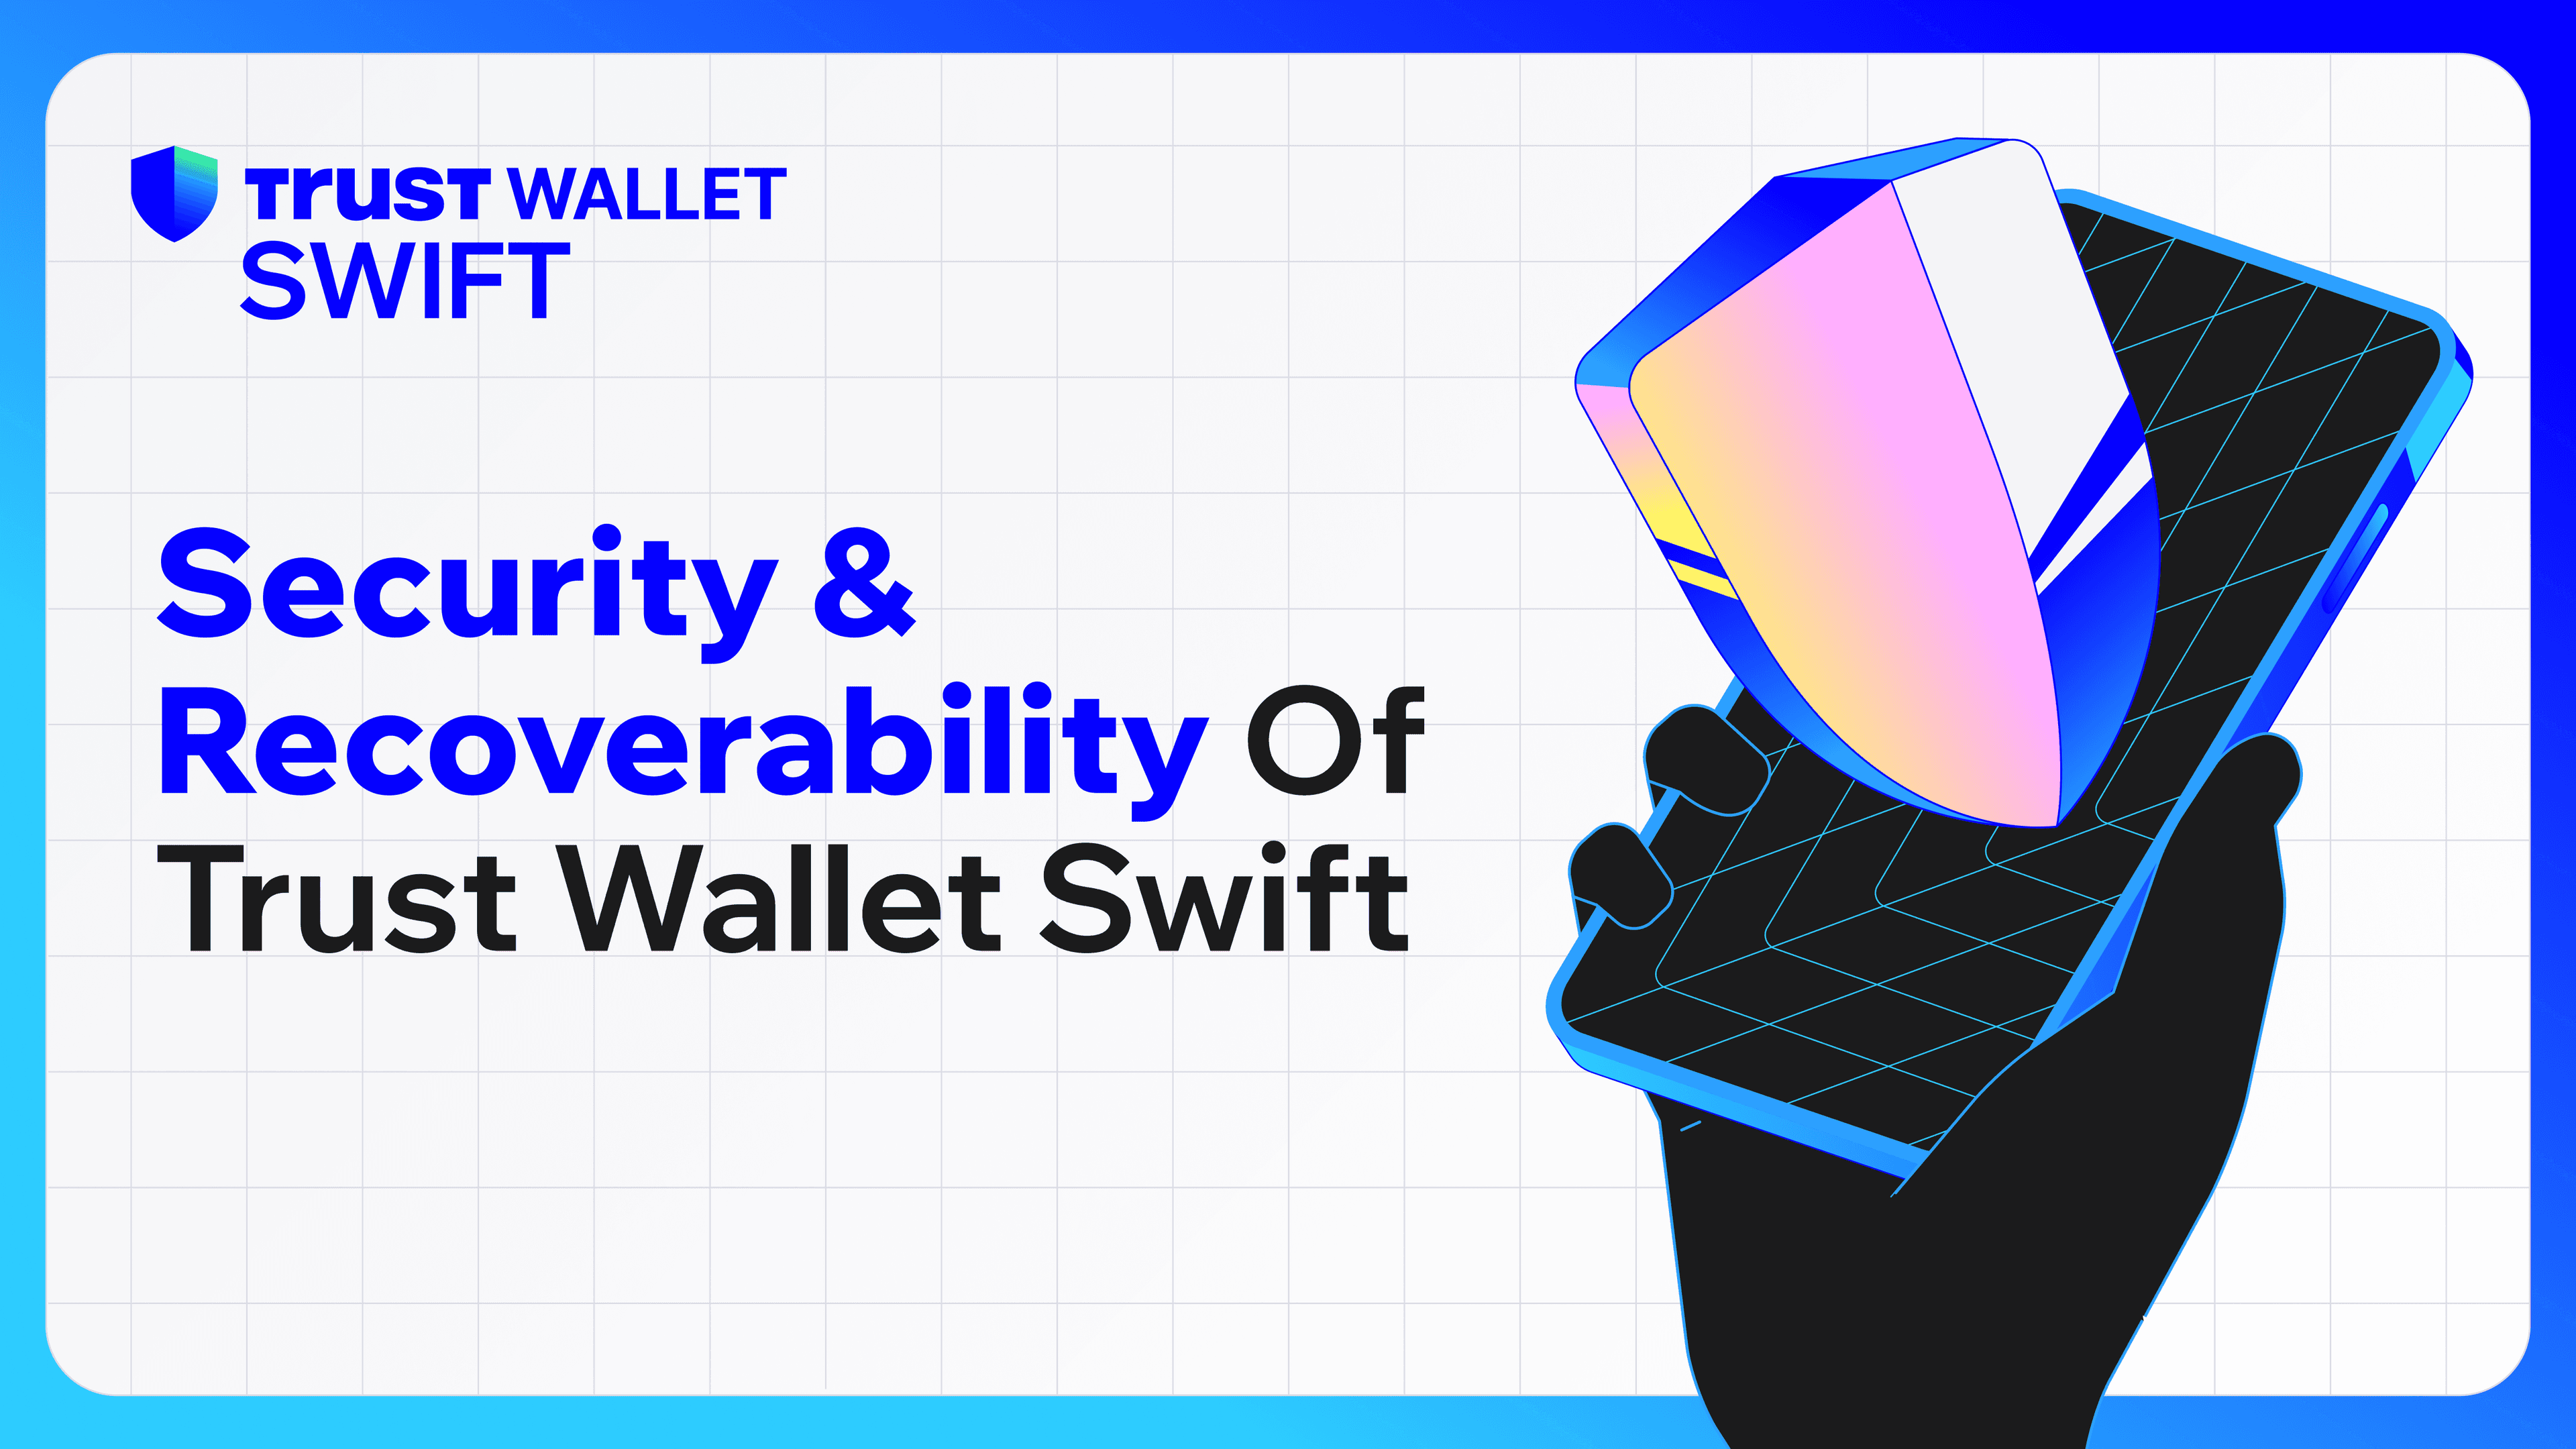 Security & Recoverability of Trust Wallet Swift